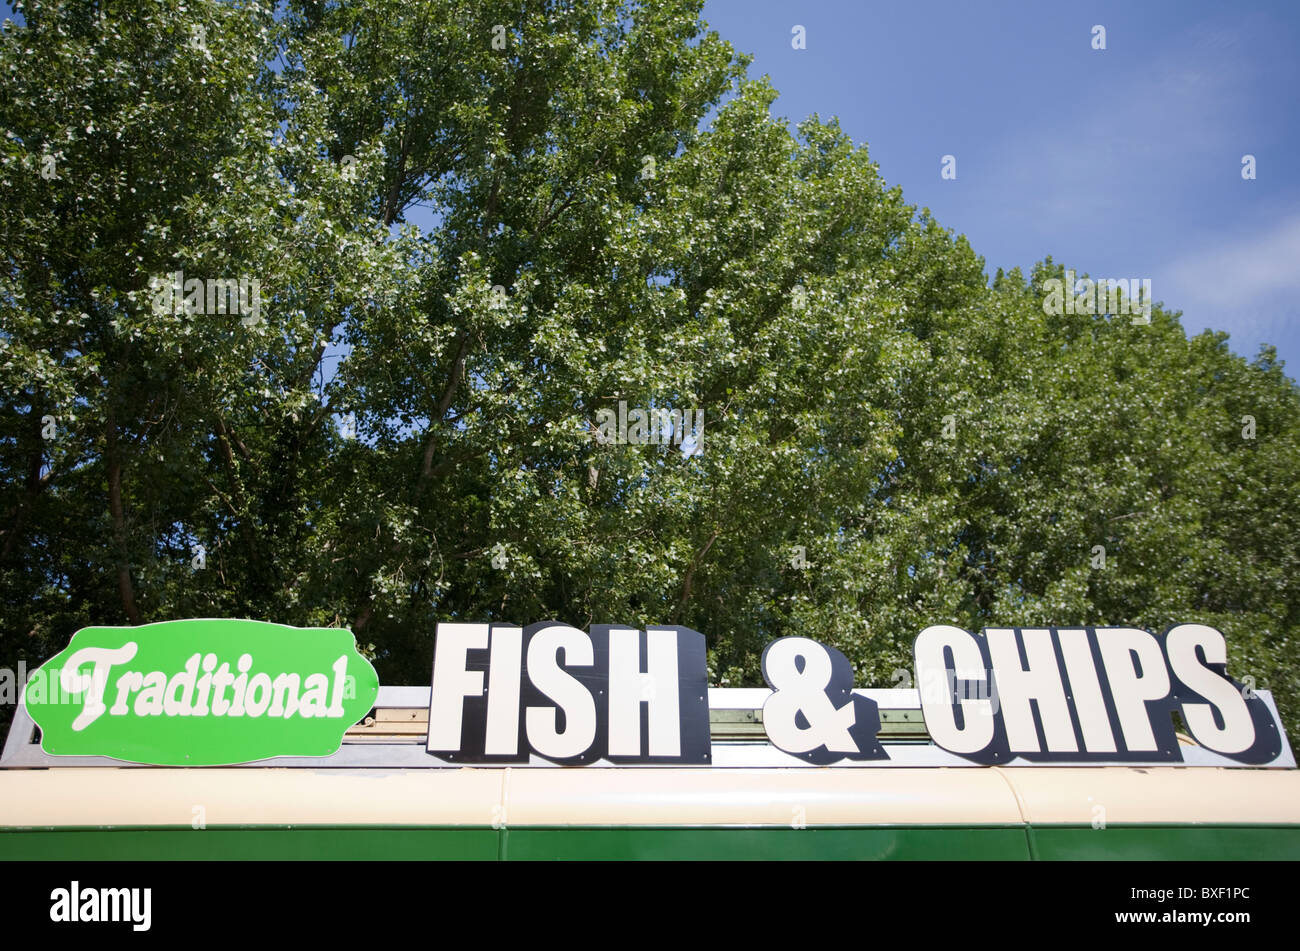 Sign for Traditional Fish & Chips Stock Photo